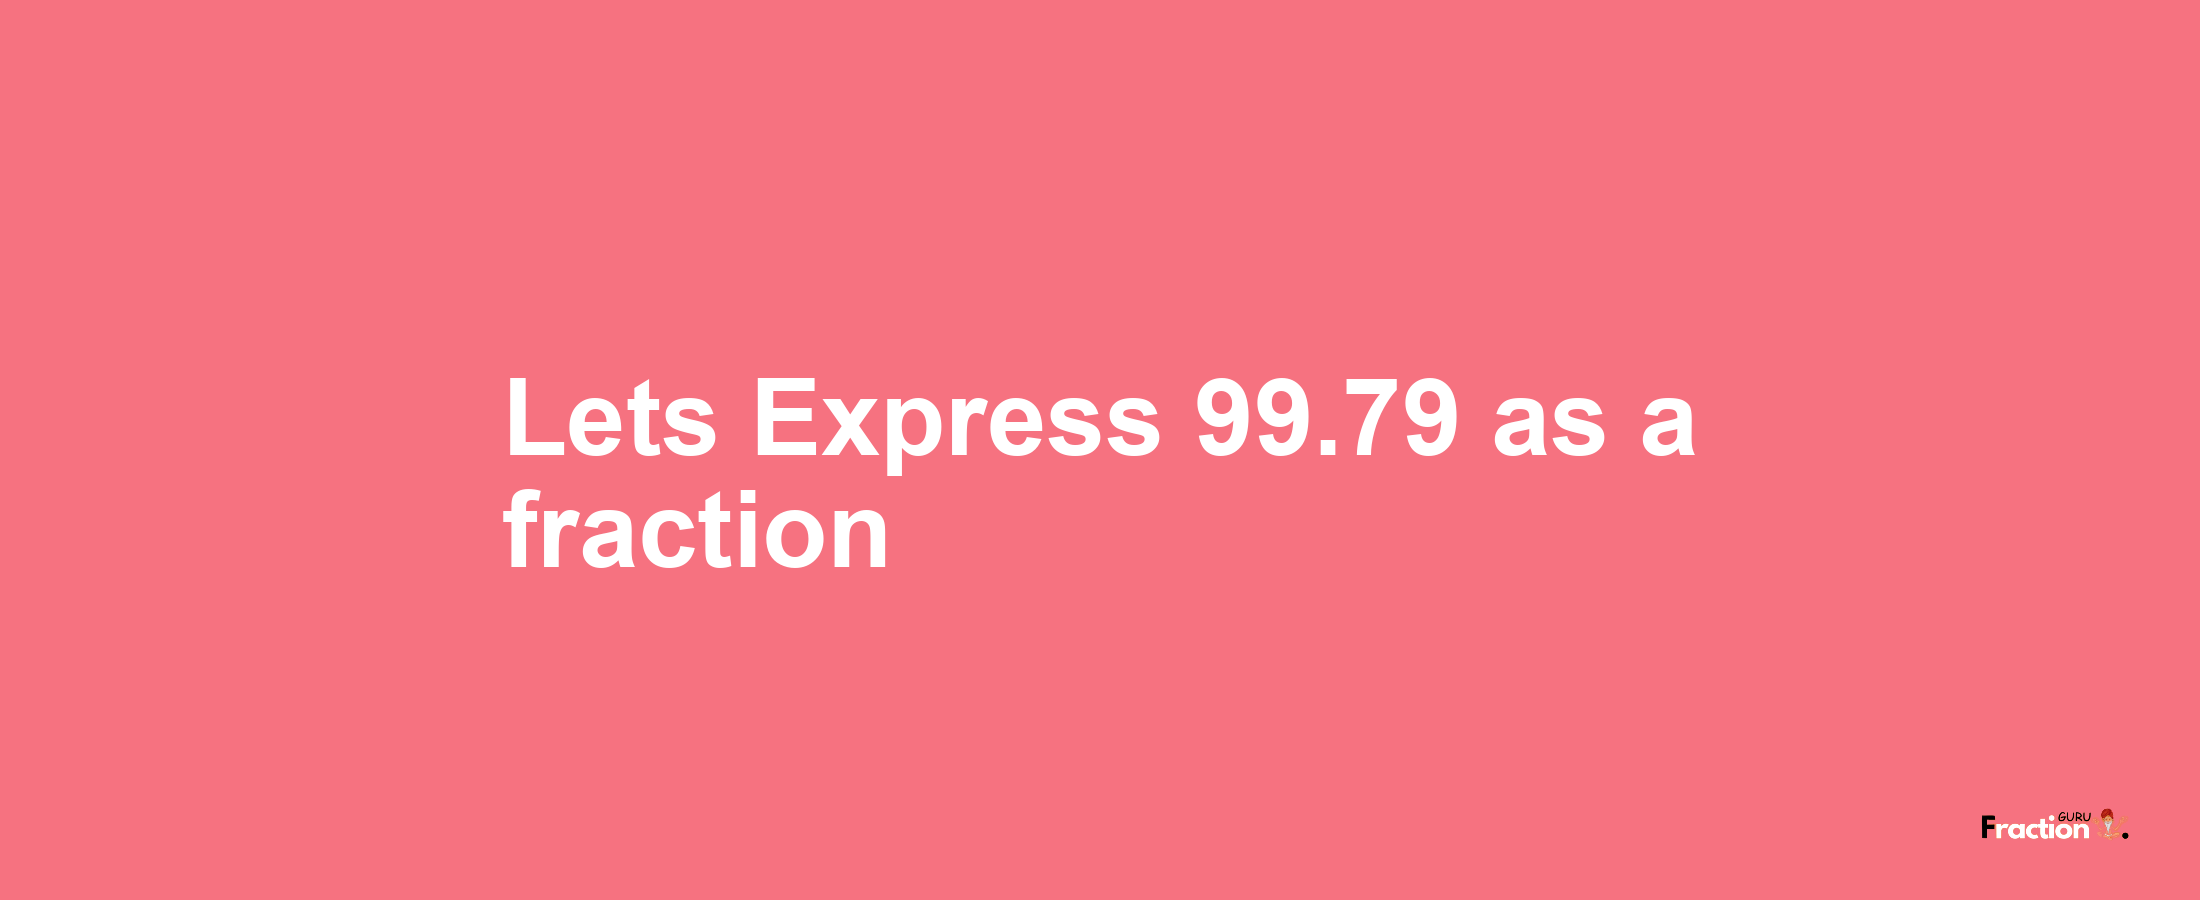 Lets Express 99.79 as afraction